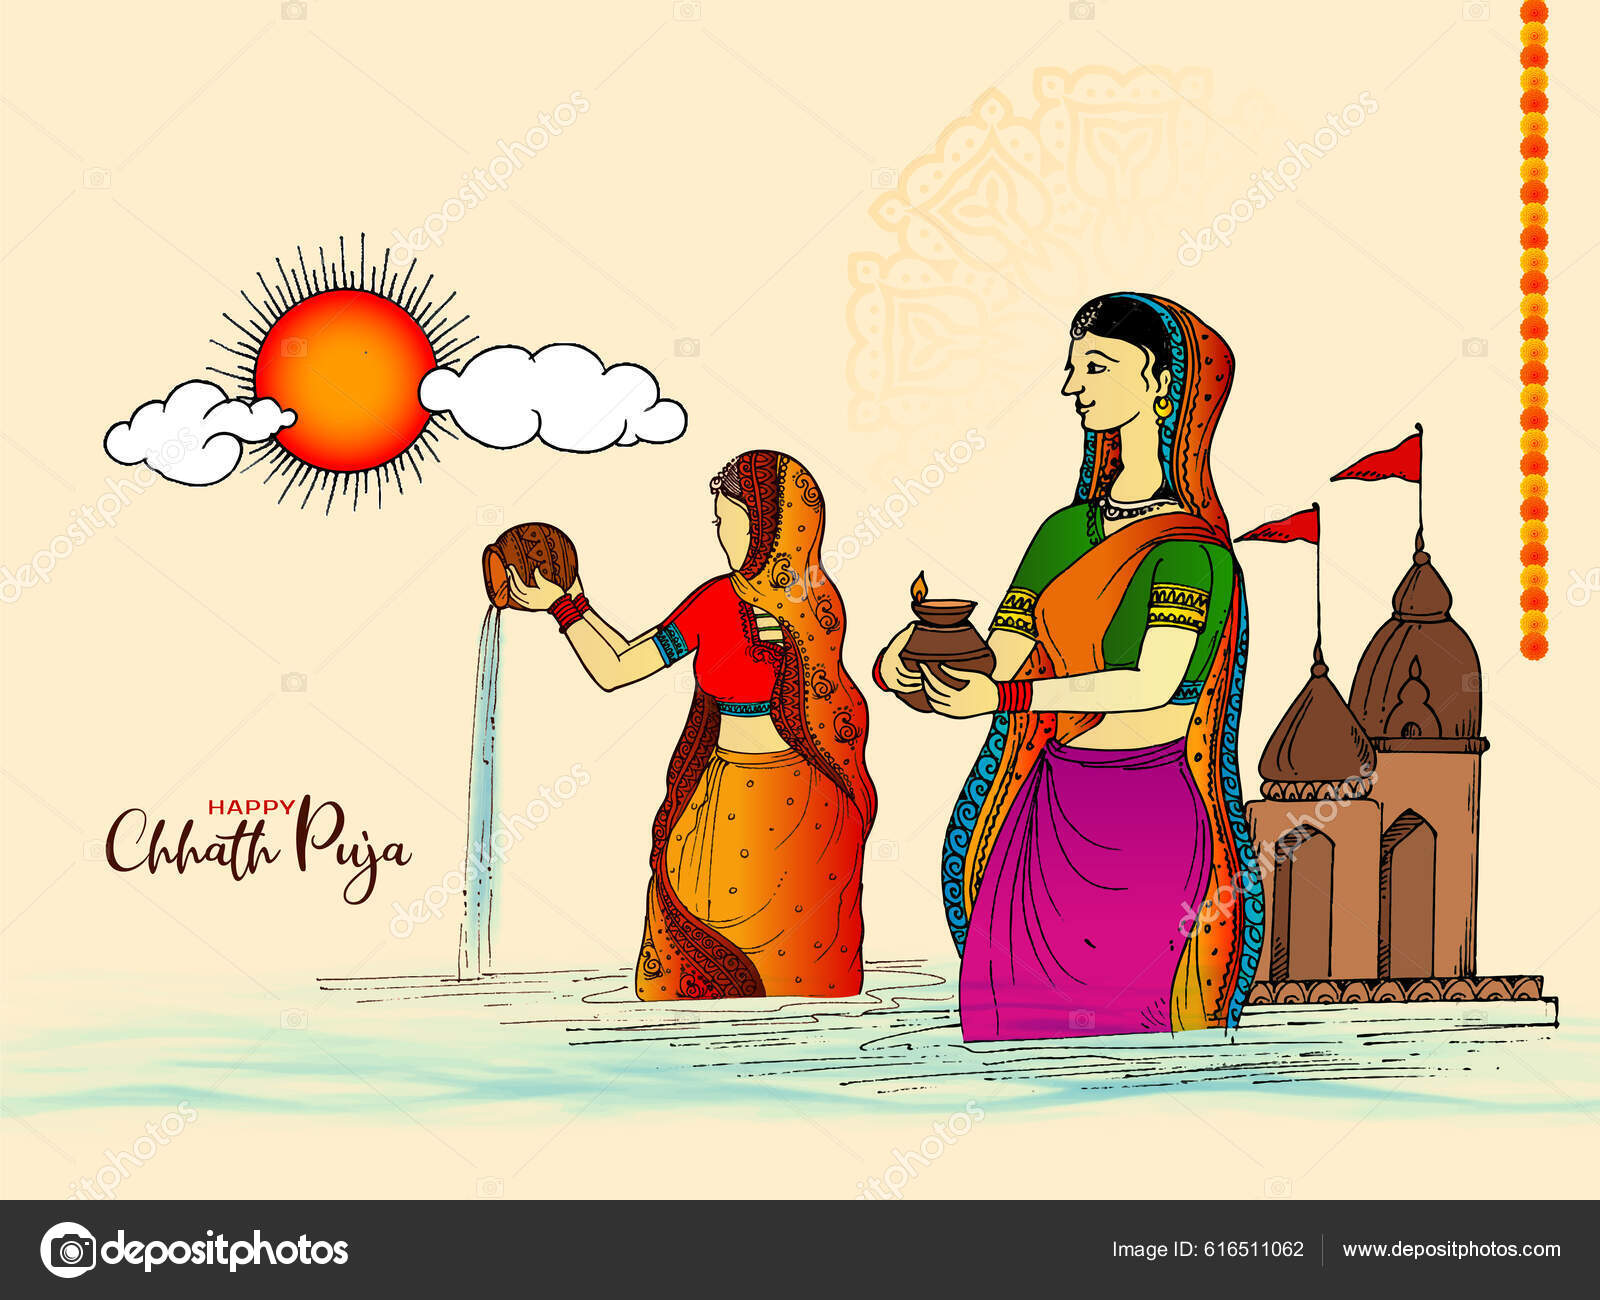 Happy Chhath Puja Illustration Indian Lady Worship Sun at River Ghaat Stock  Vector - Illustration of puja, happy: 134357743